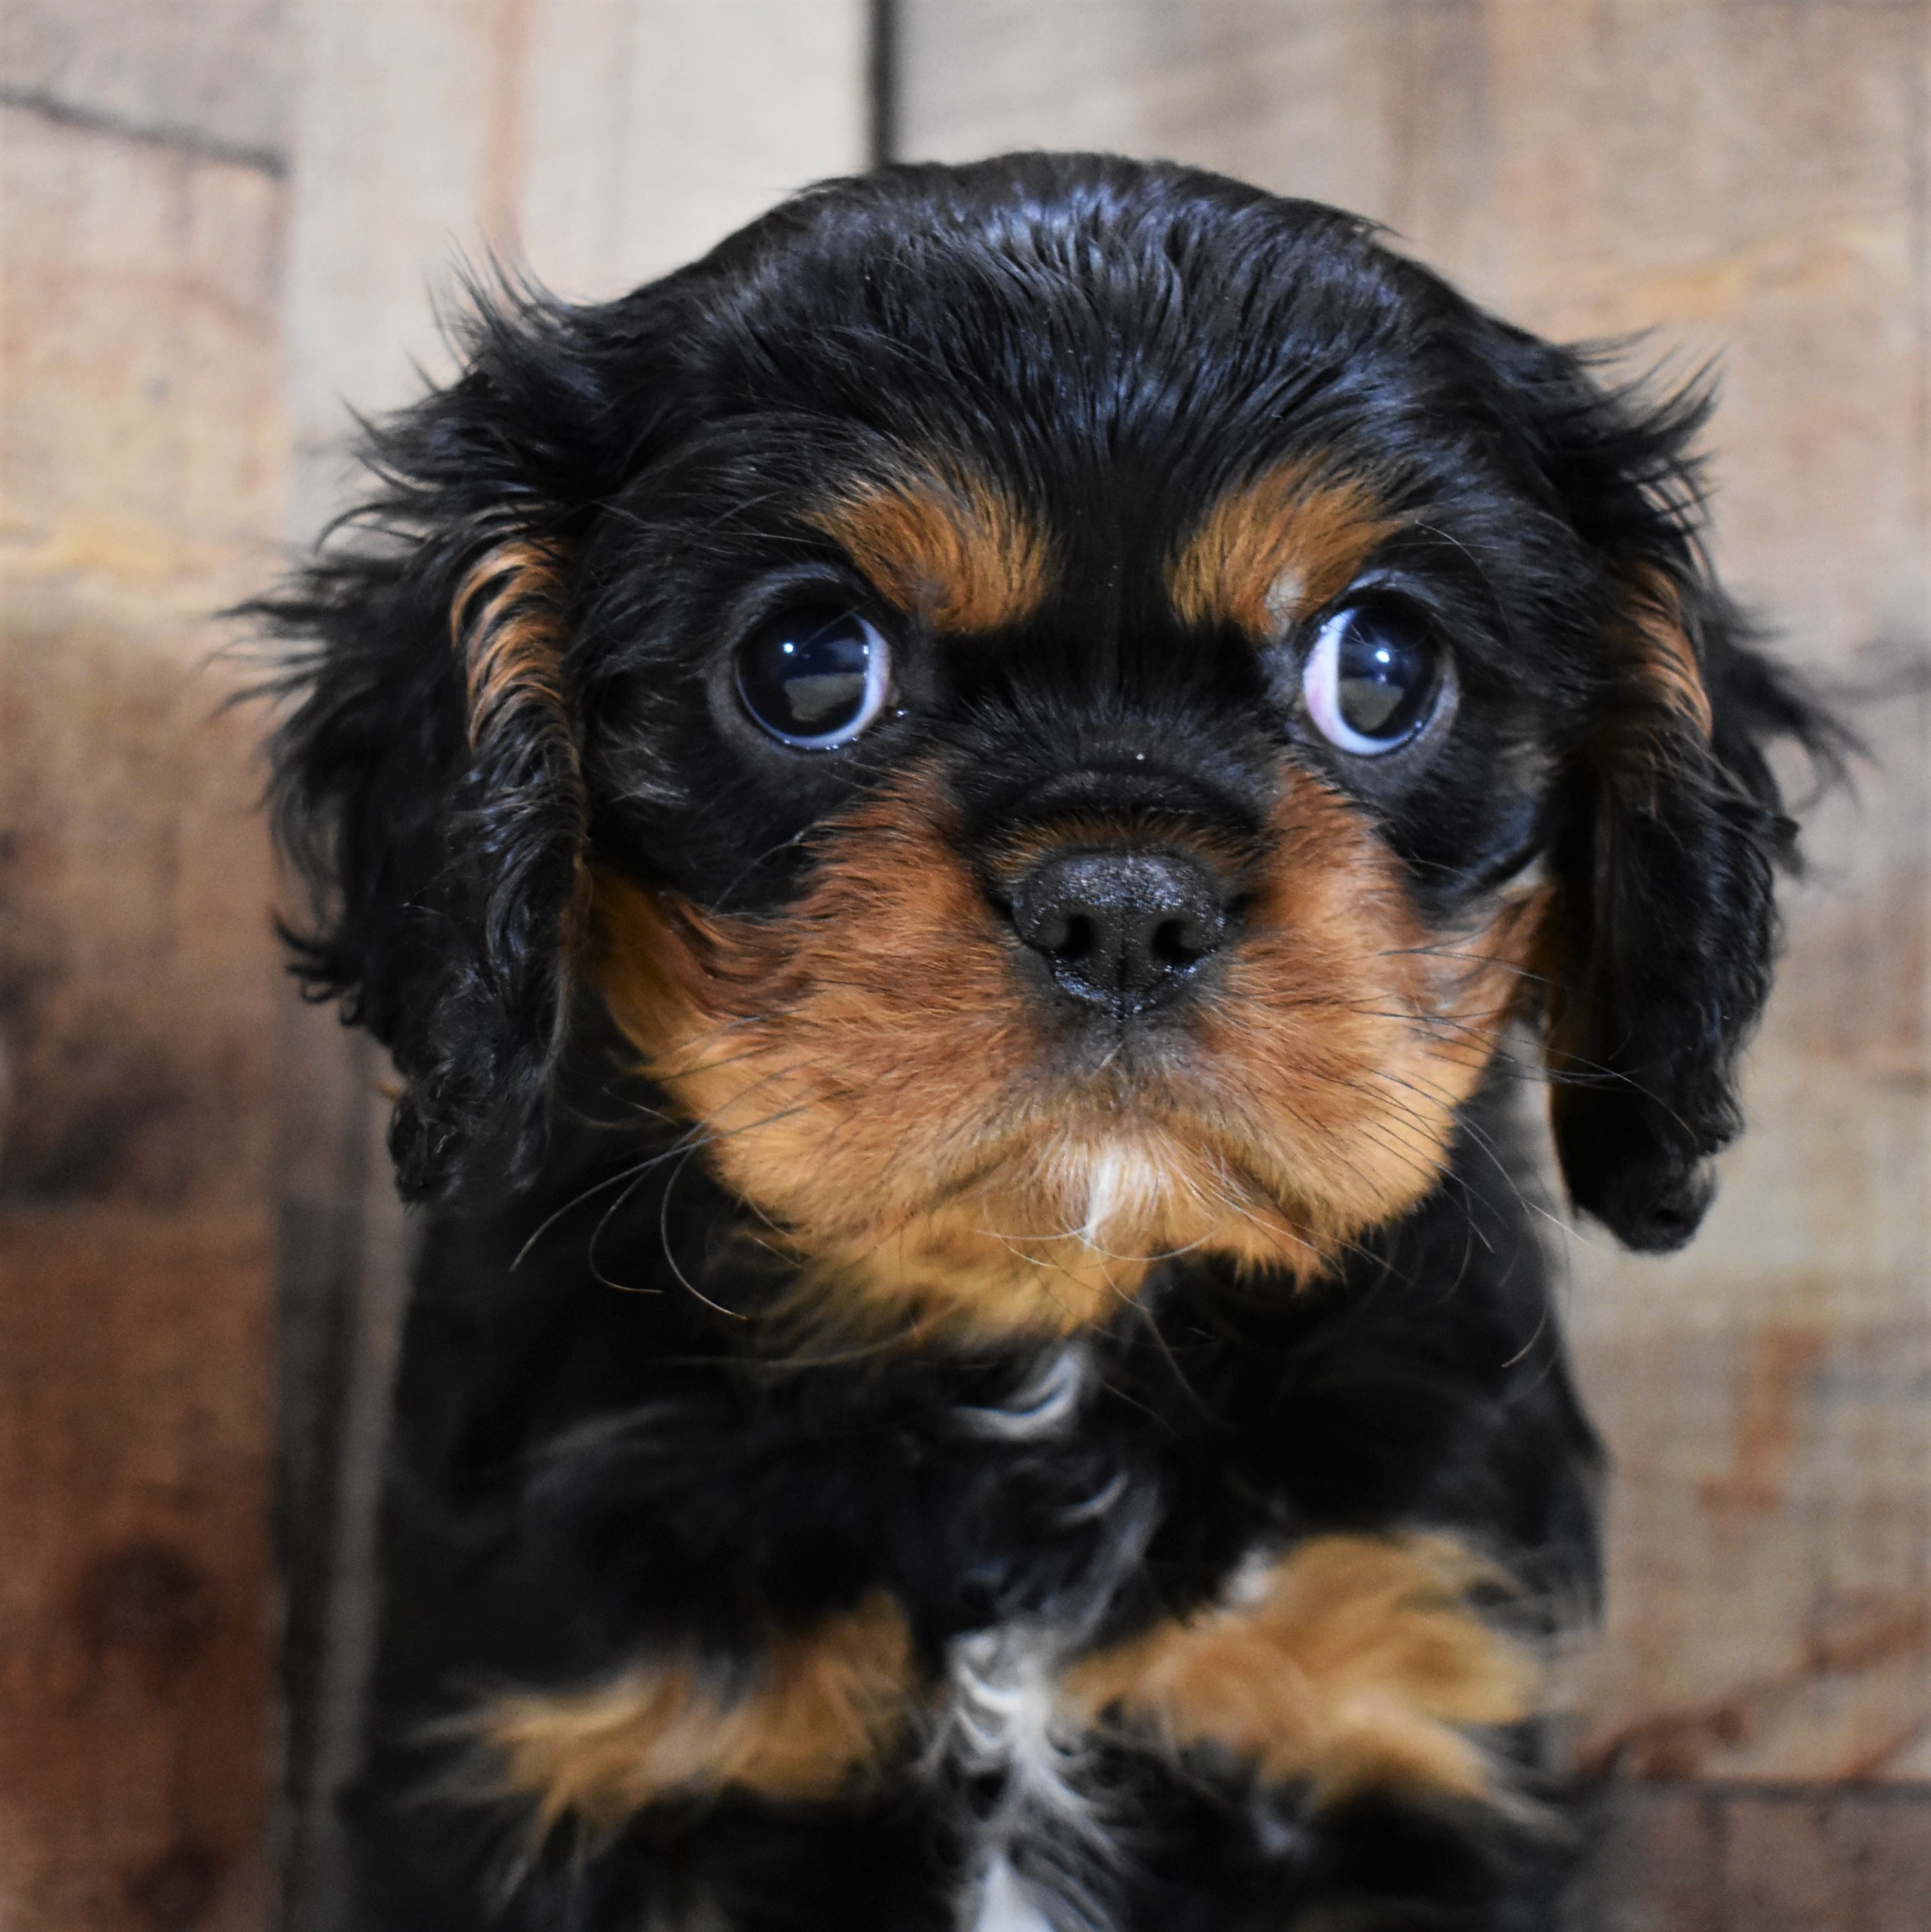 Cavalier King Charles Spaniel (M3D) My Name Is Calypso